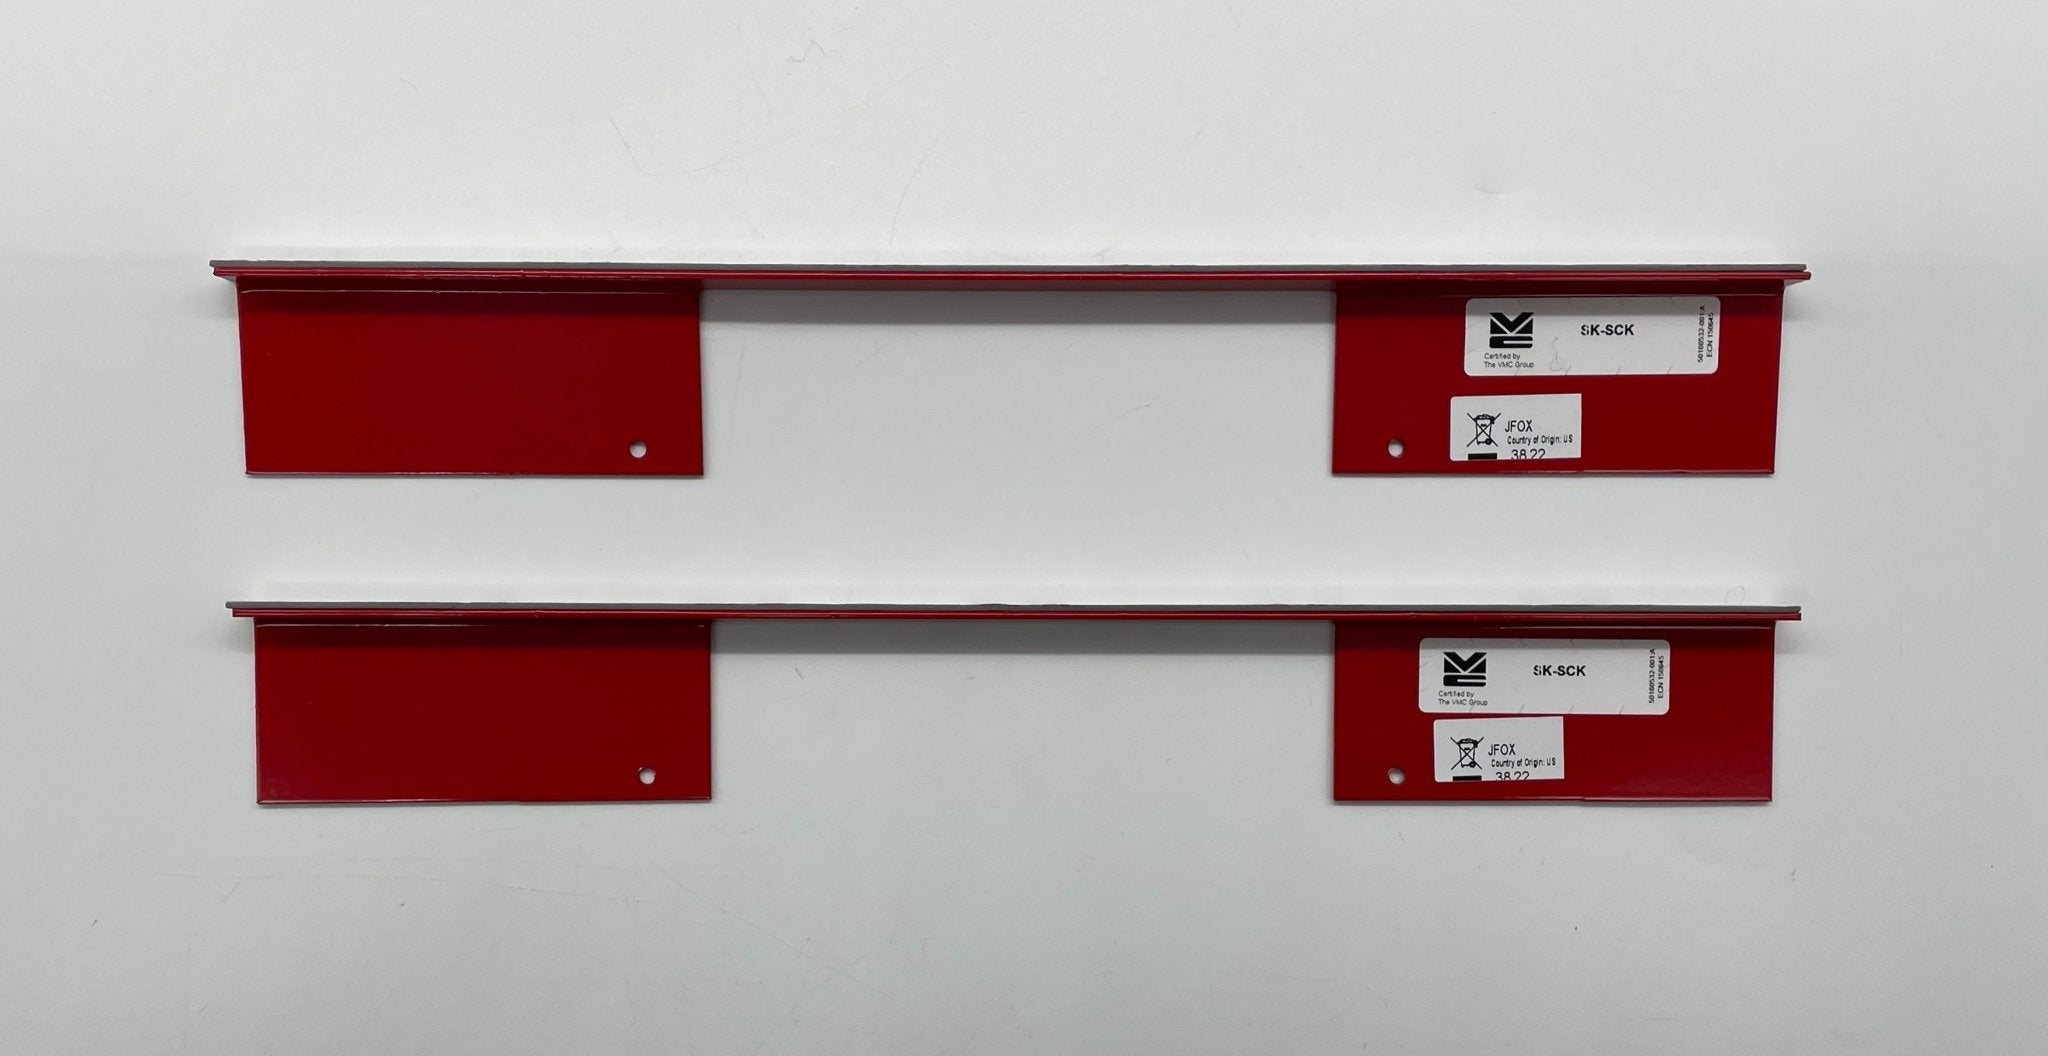 Silent Knight SK-SCK - The Fire Alarm Supplier